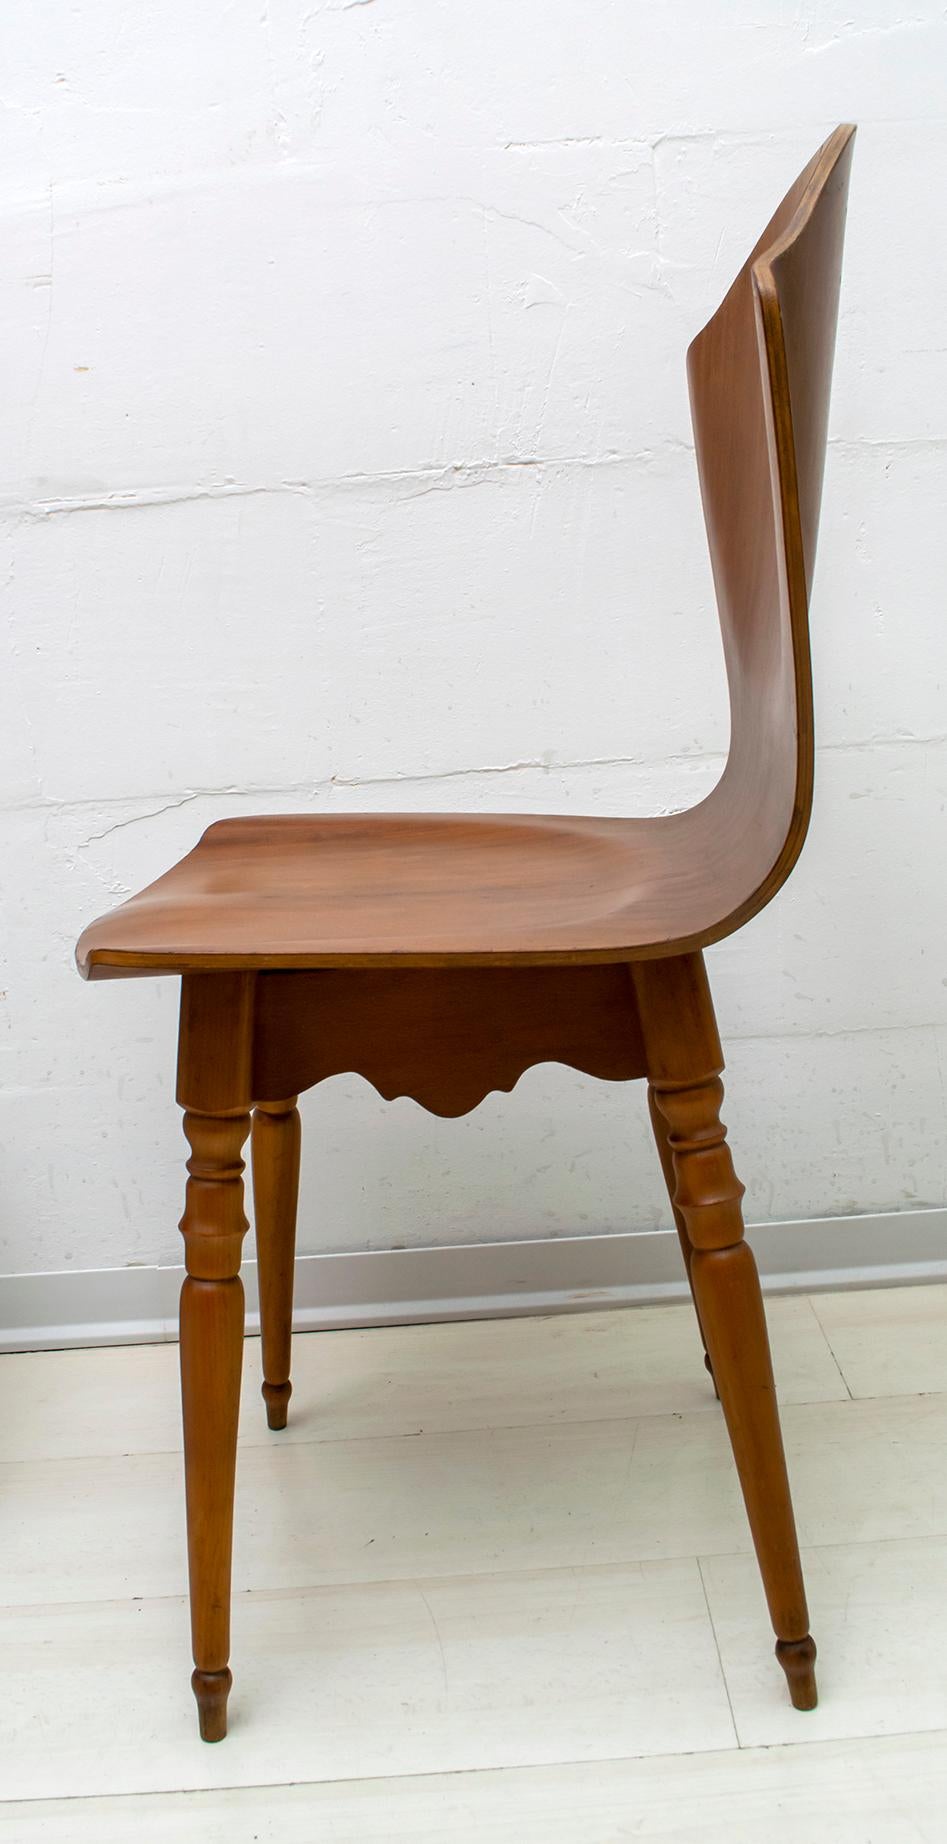 After Carlo Ratti Mid-Century Modern Italian Bentwood Chairs, 1950s For Sale 4